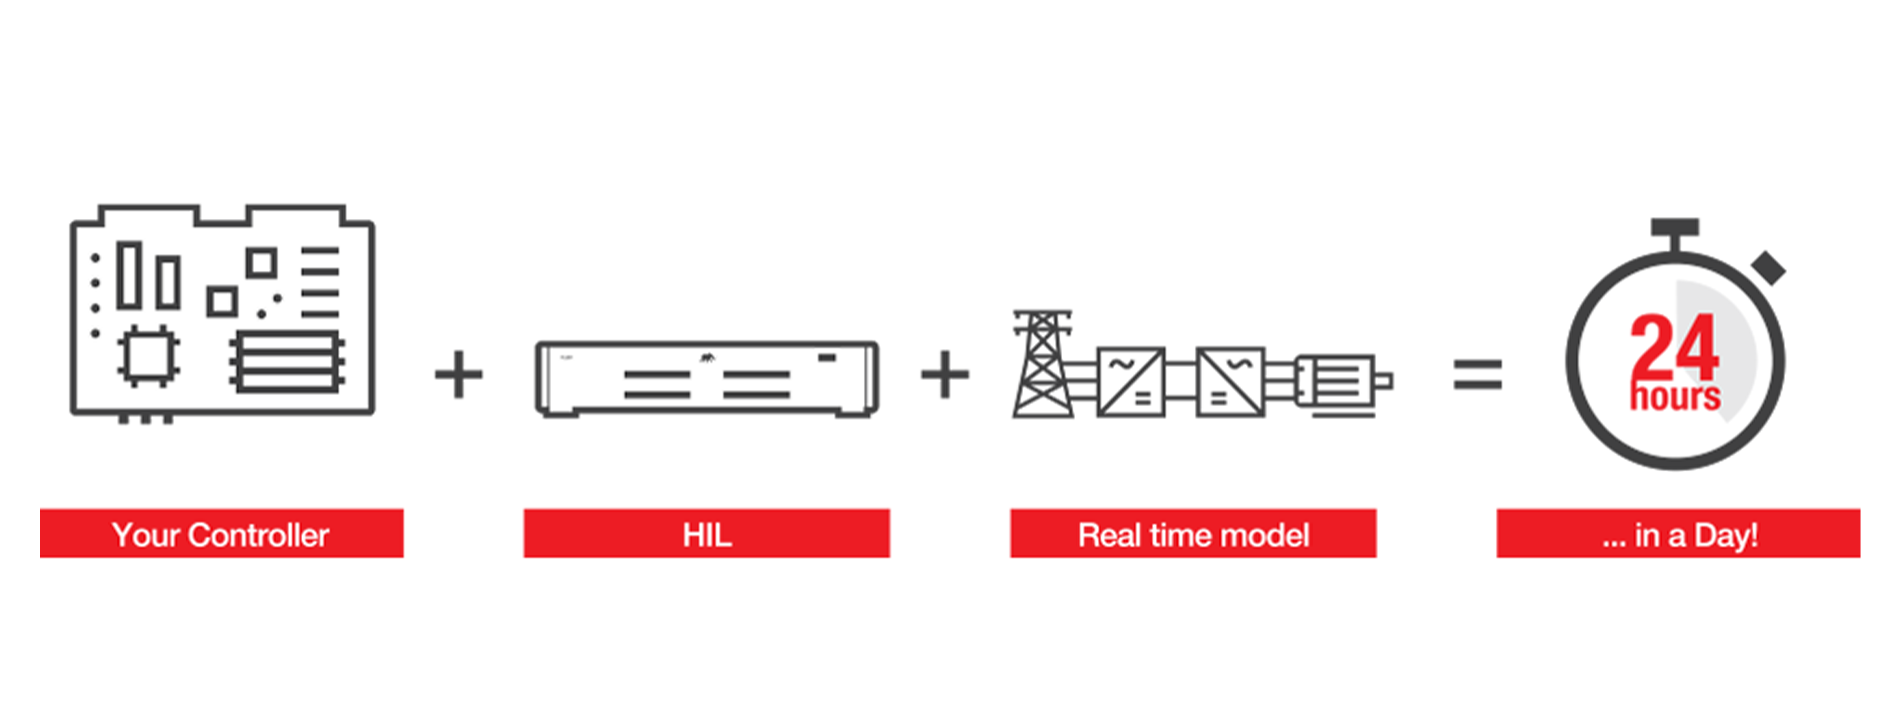 An illustration that says that controller plus HIL plus real time model equals 24 hours.